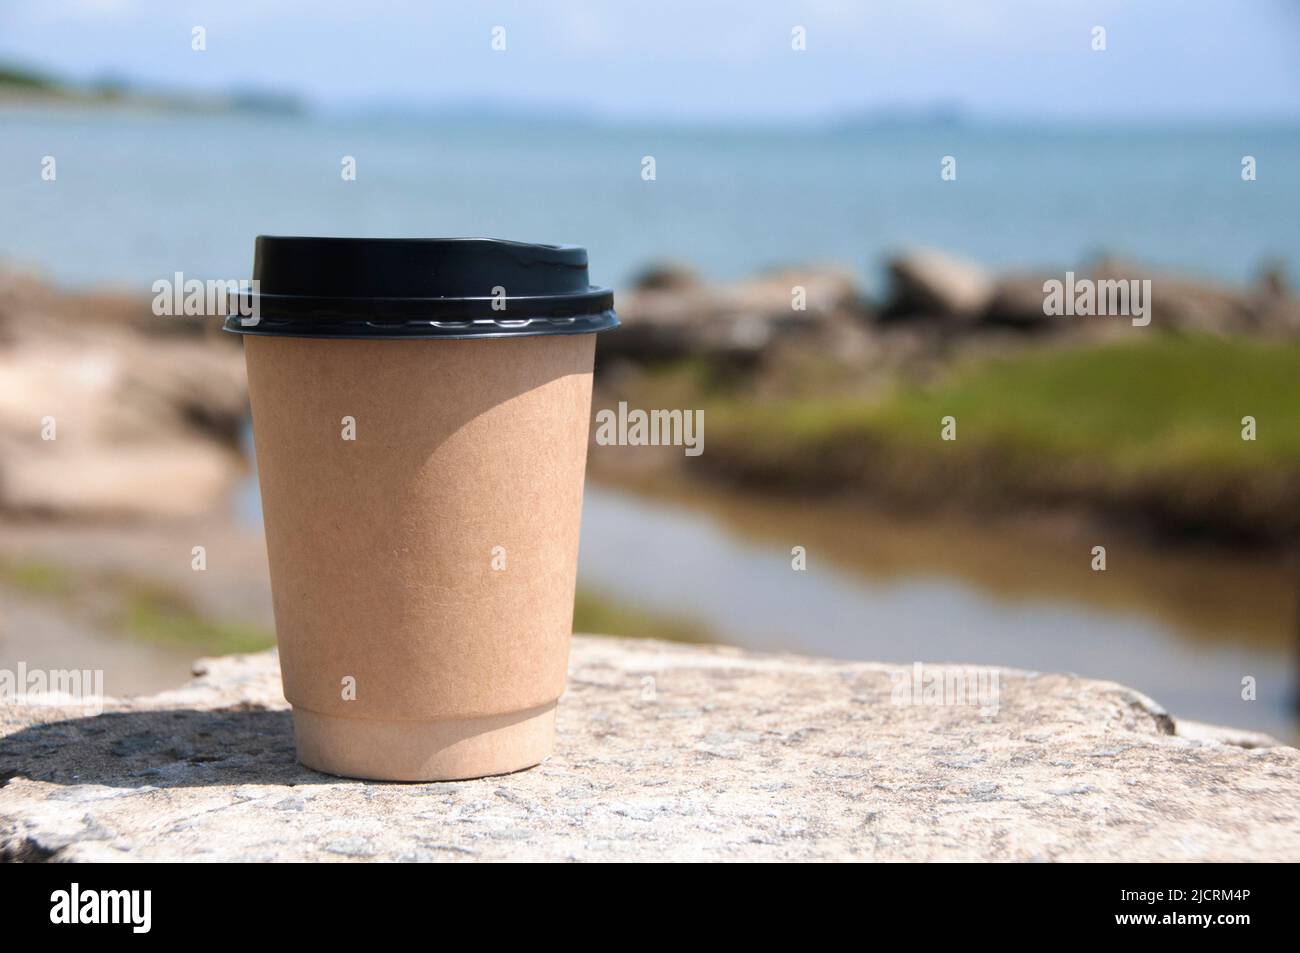 https://c8.alamy.com/comp/2JCRM4P/paper-coffee-cup-on-top-of-rock-with-blurred-beach-background-copy-space-2JCRM4P.jpg